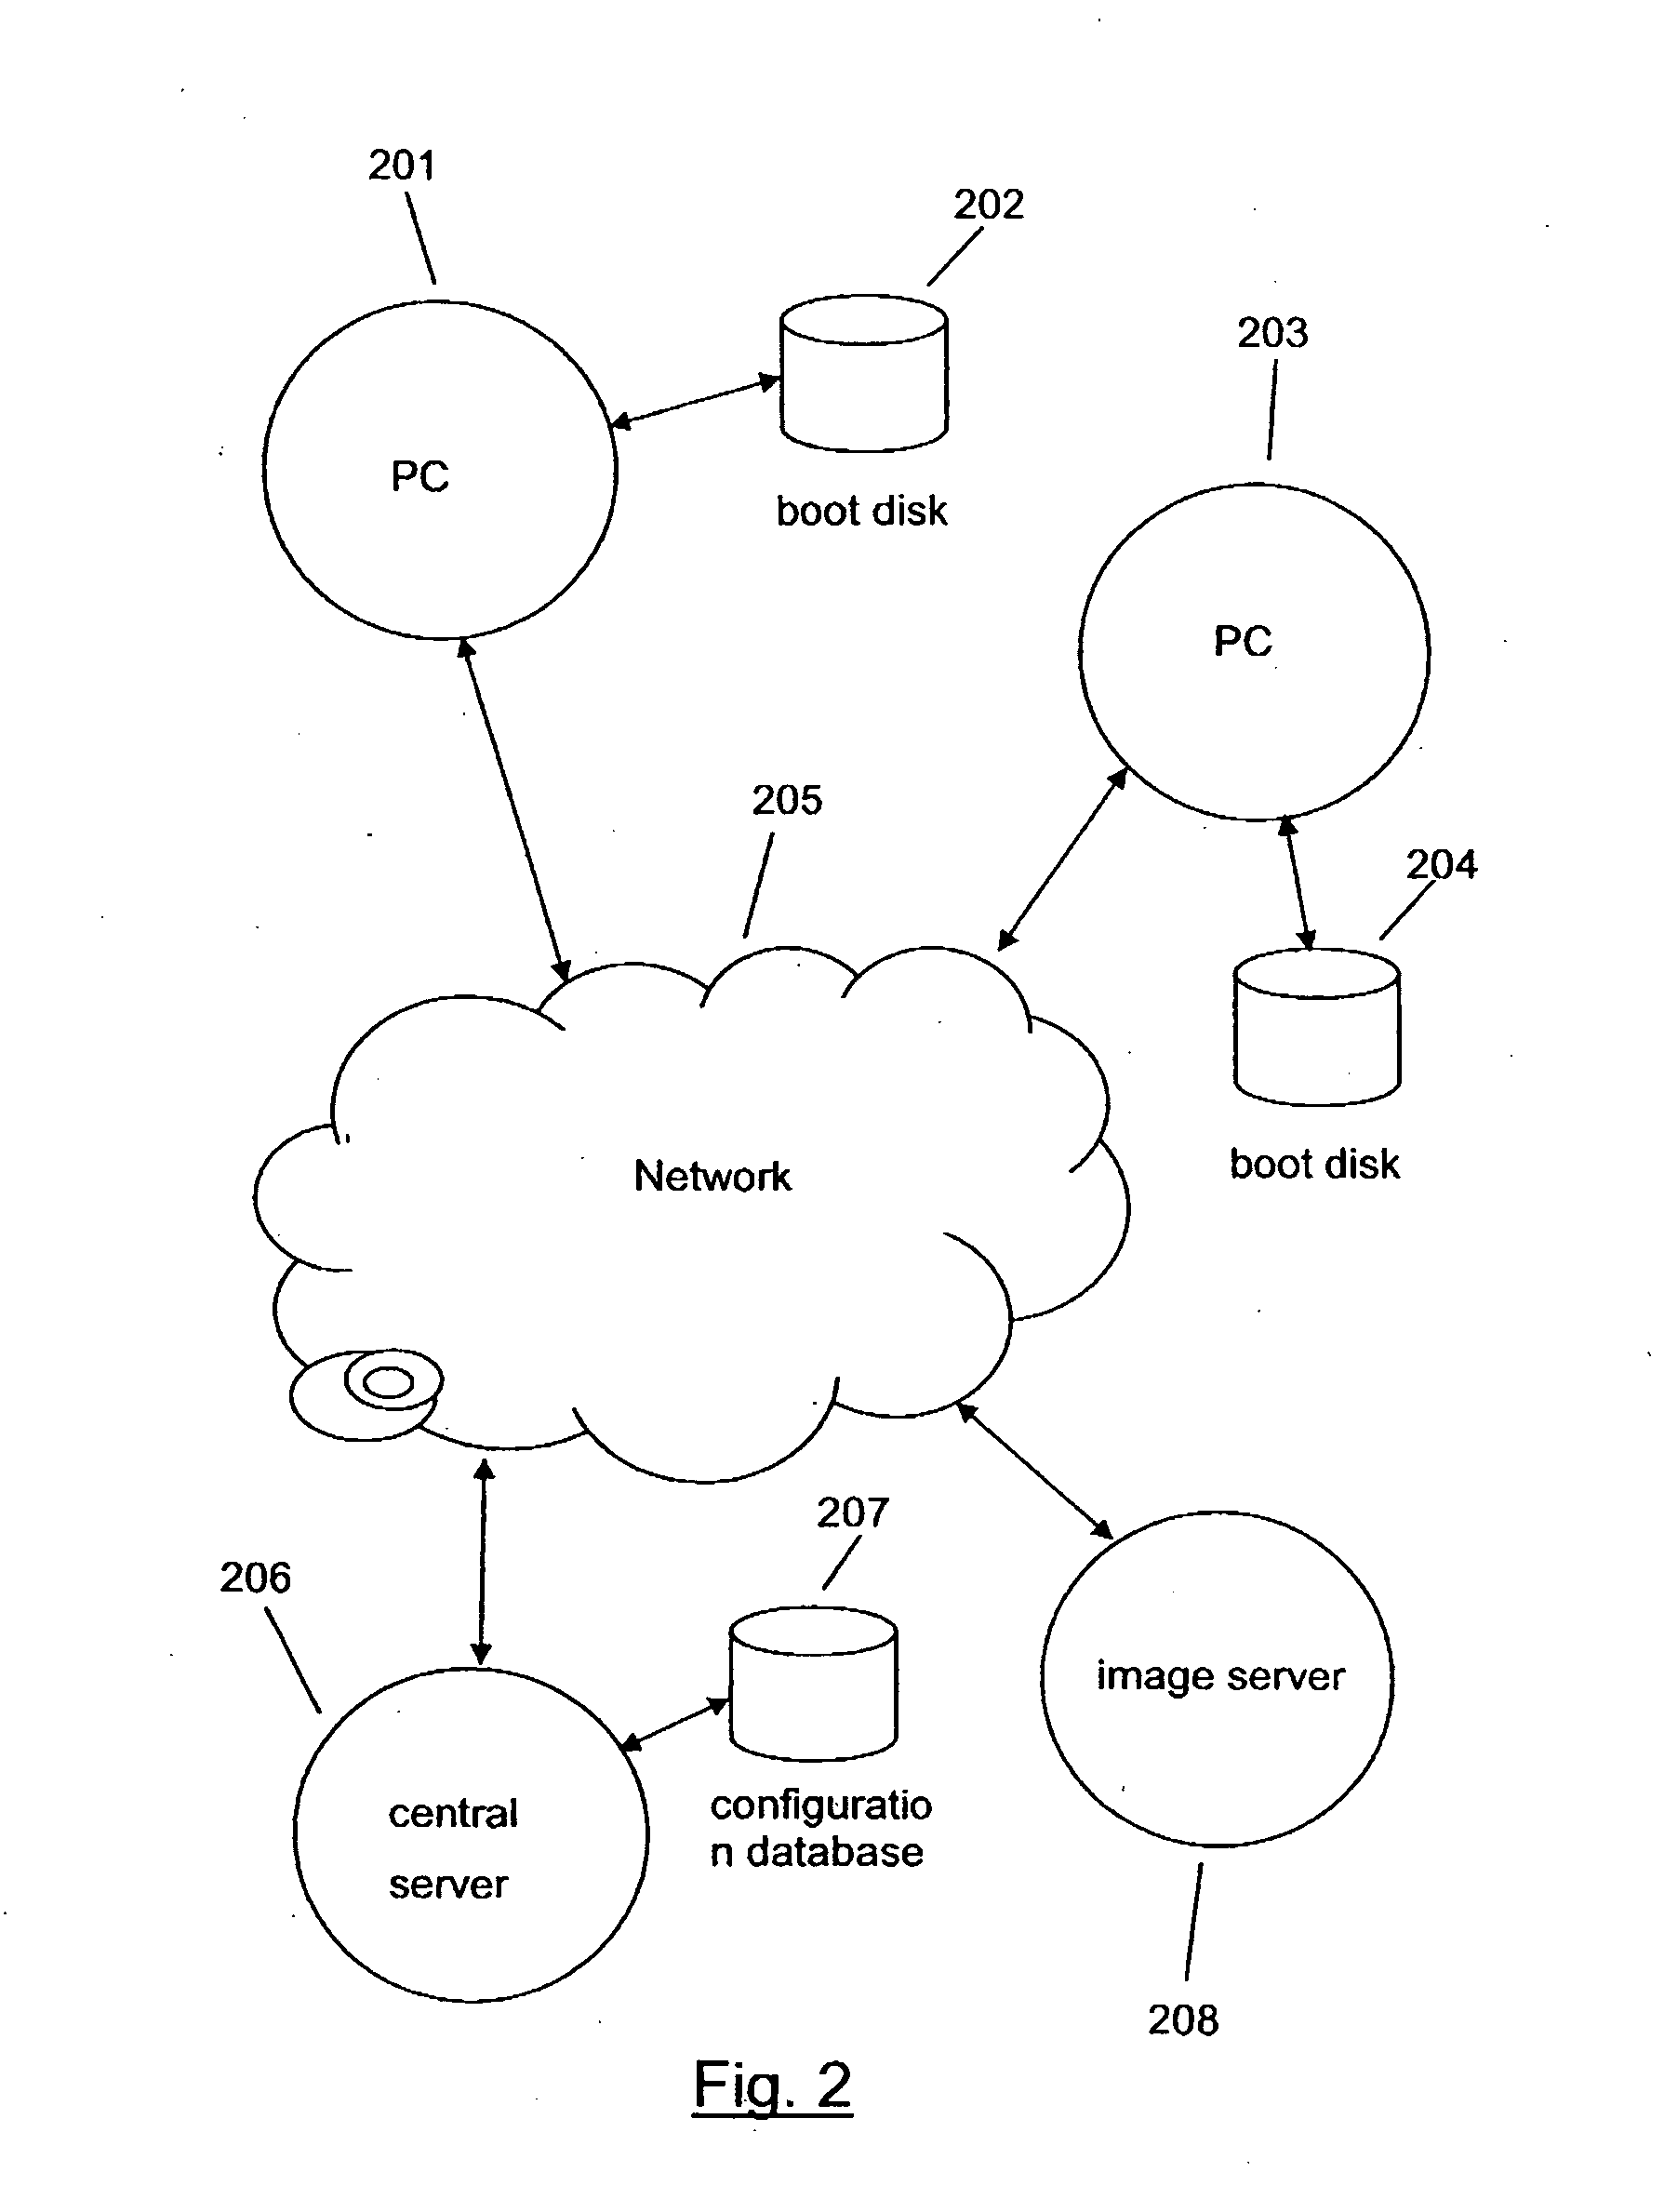 Method and apparatus for distribution and installation of computer programs across an enterprise